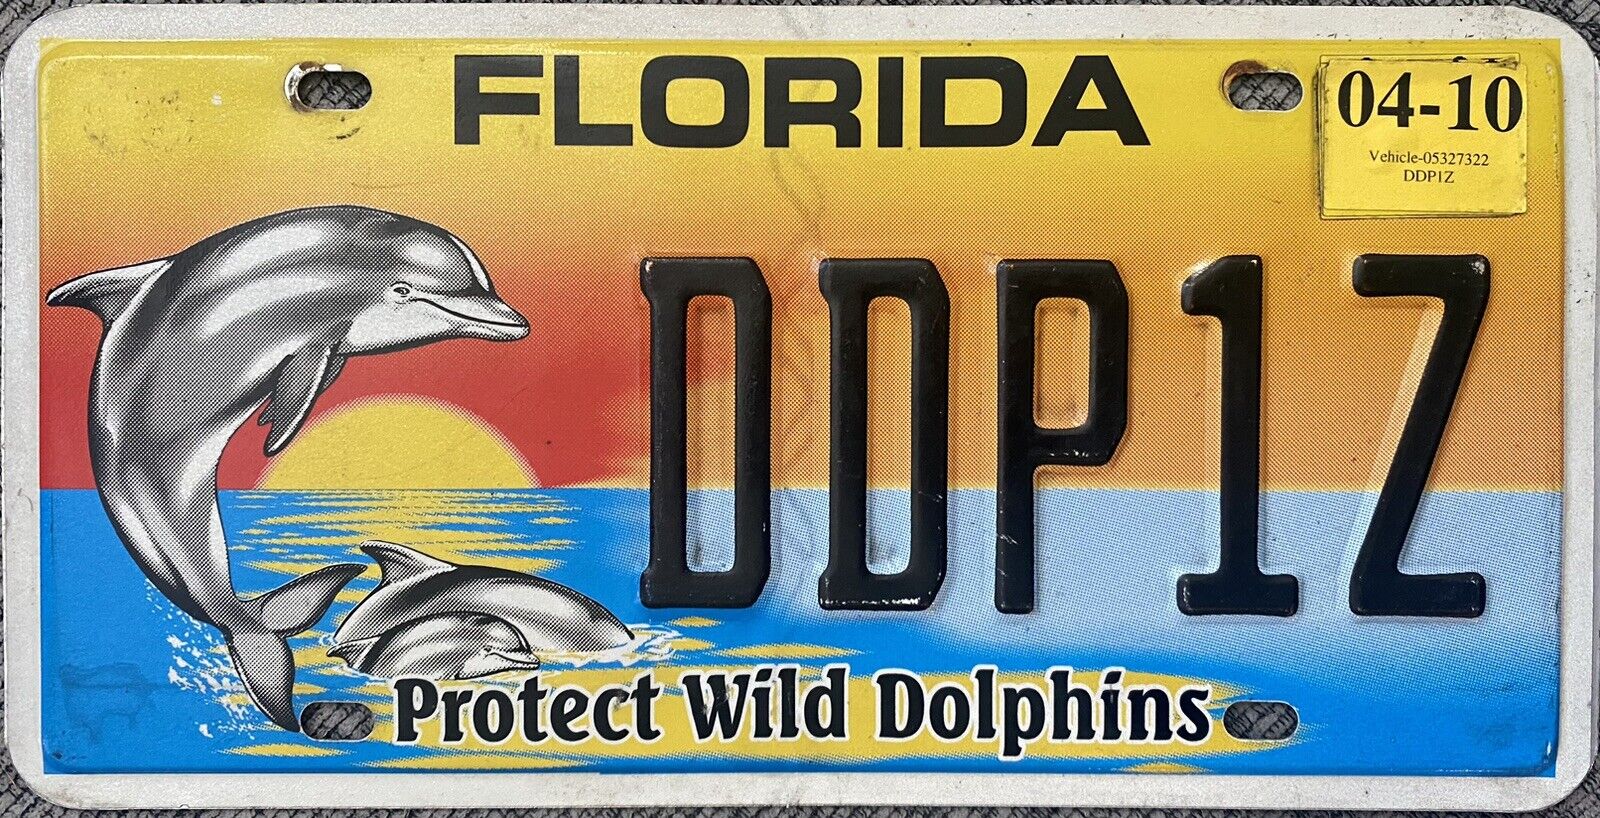 2010 Florida Protect Wild Dolphins License Plate EXPIRED